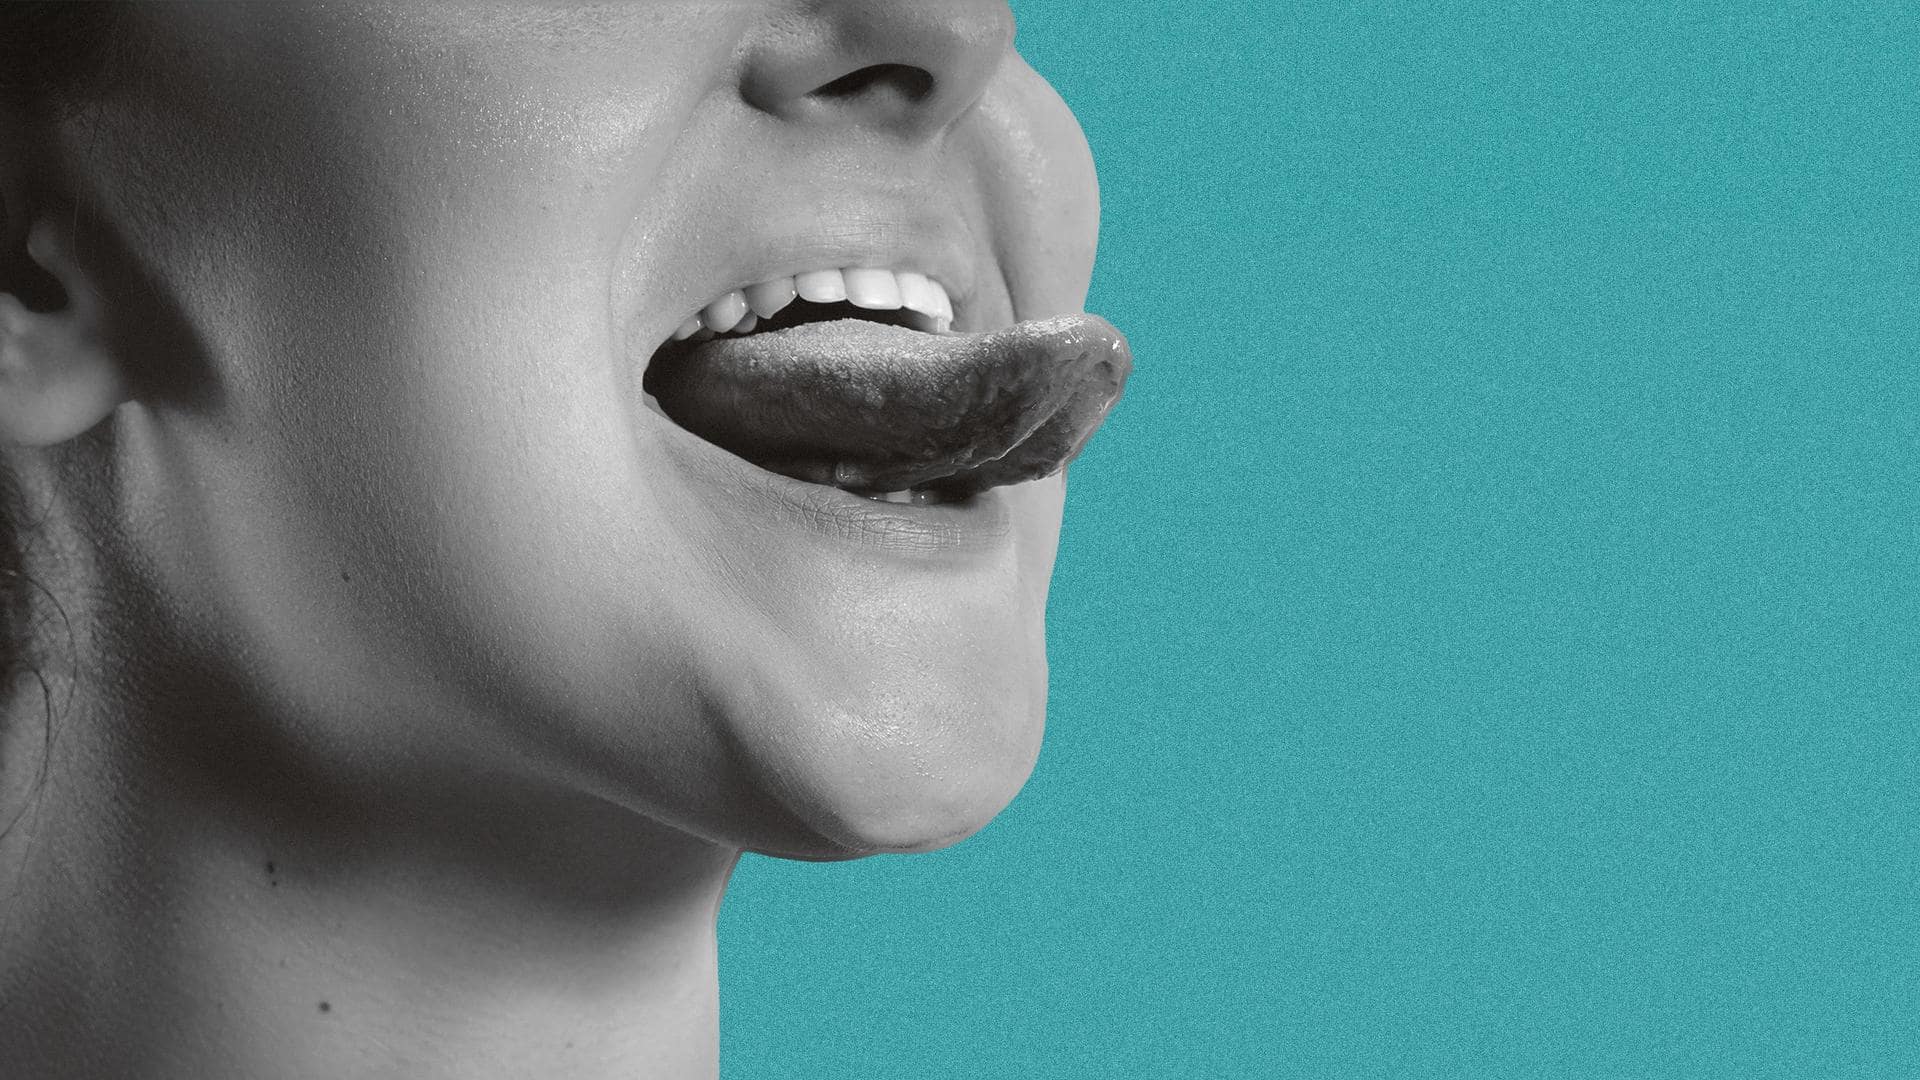 Your tongue can reveal a lot about your health